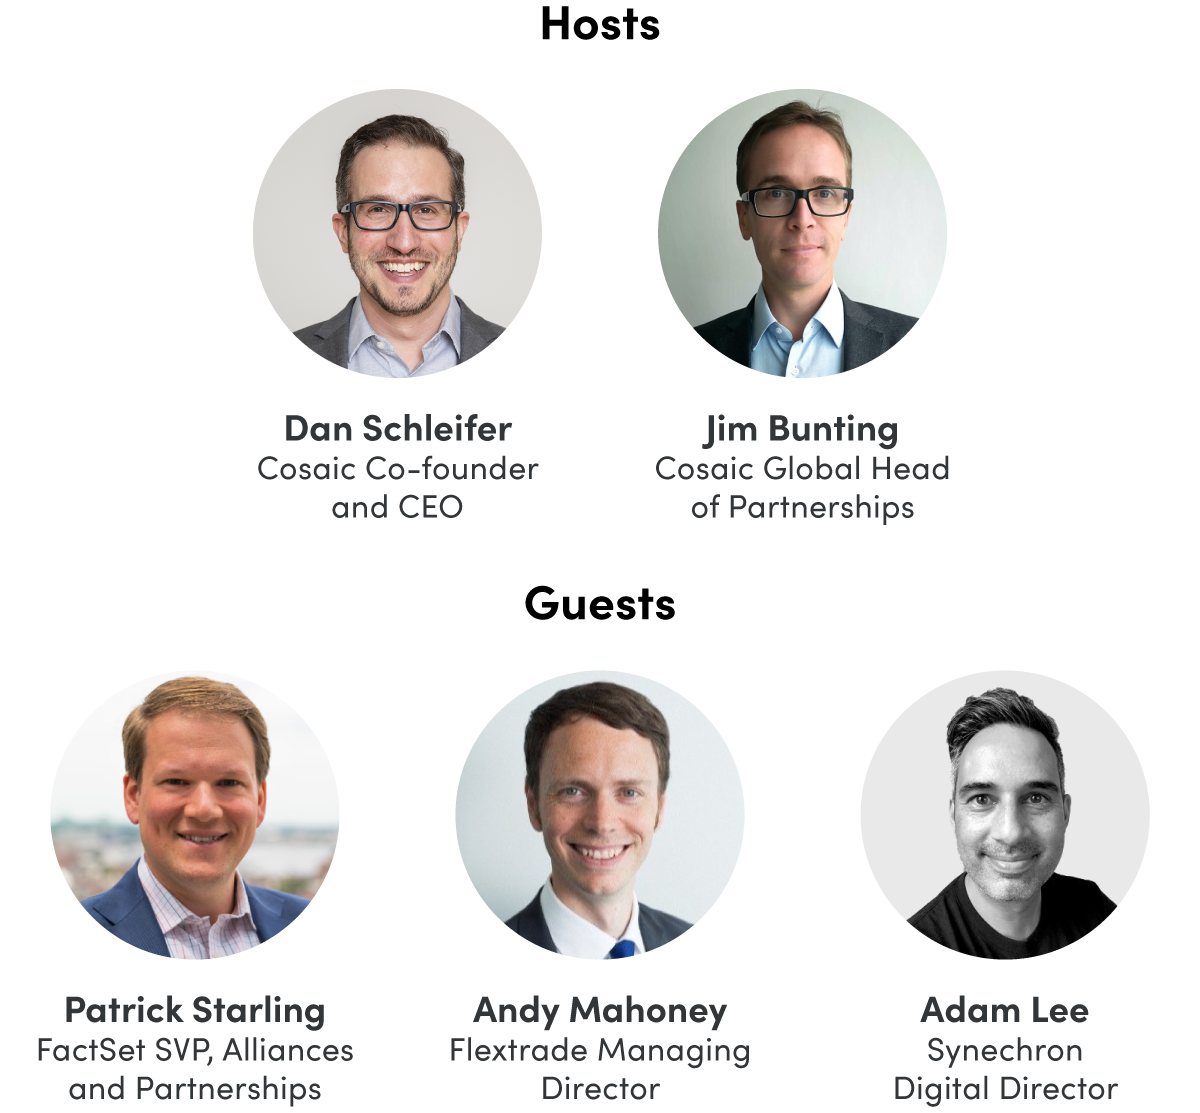 Hosts: Dan Schleifer, CEO and Co-Founder, Cosaic Jim Bunting, Global Head of Partnerships, Cosaic Guests: Patrick Starling, SVP, Alliances and Partnerships, FactSet Andy Mahoney, Managing Director, Flextrade Adam Lee, Director of Experience Design at Synechron 